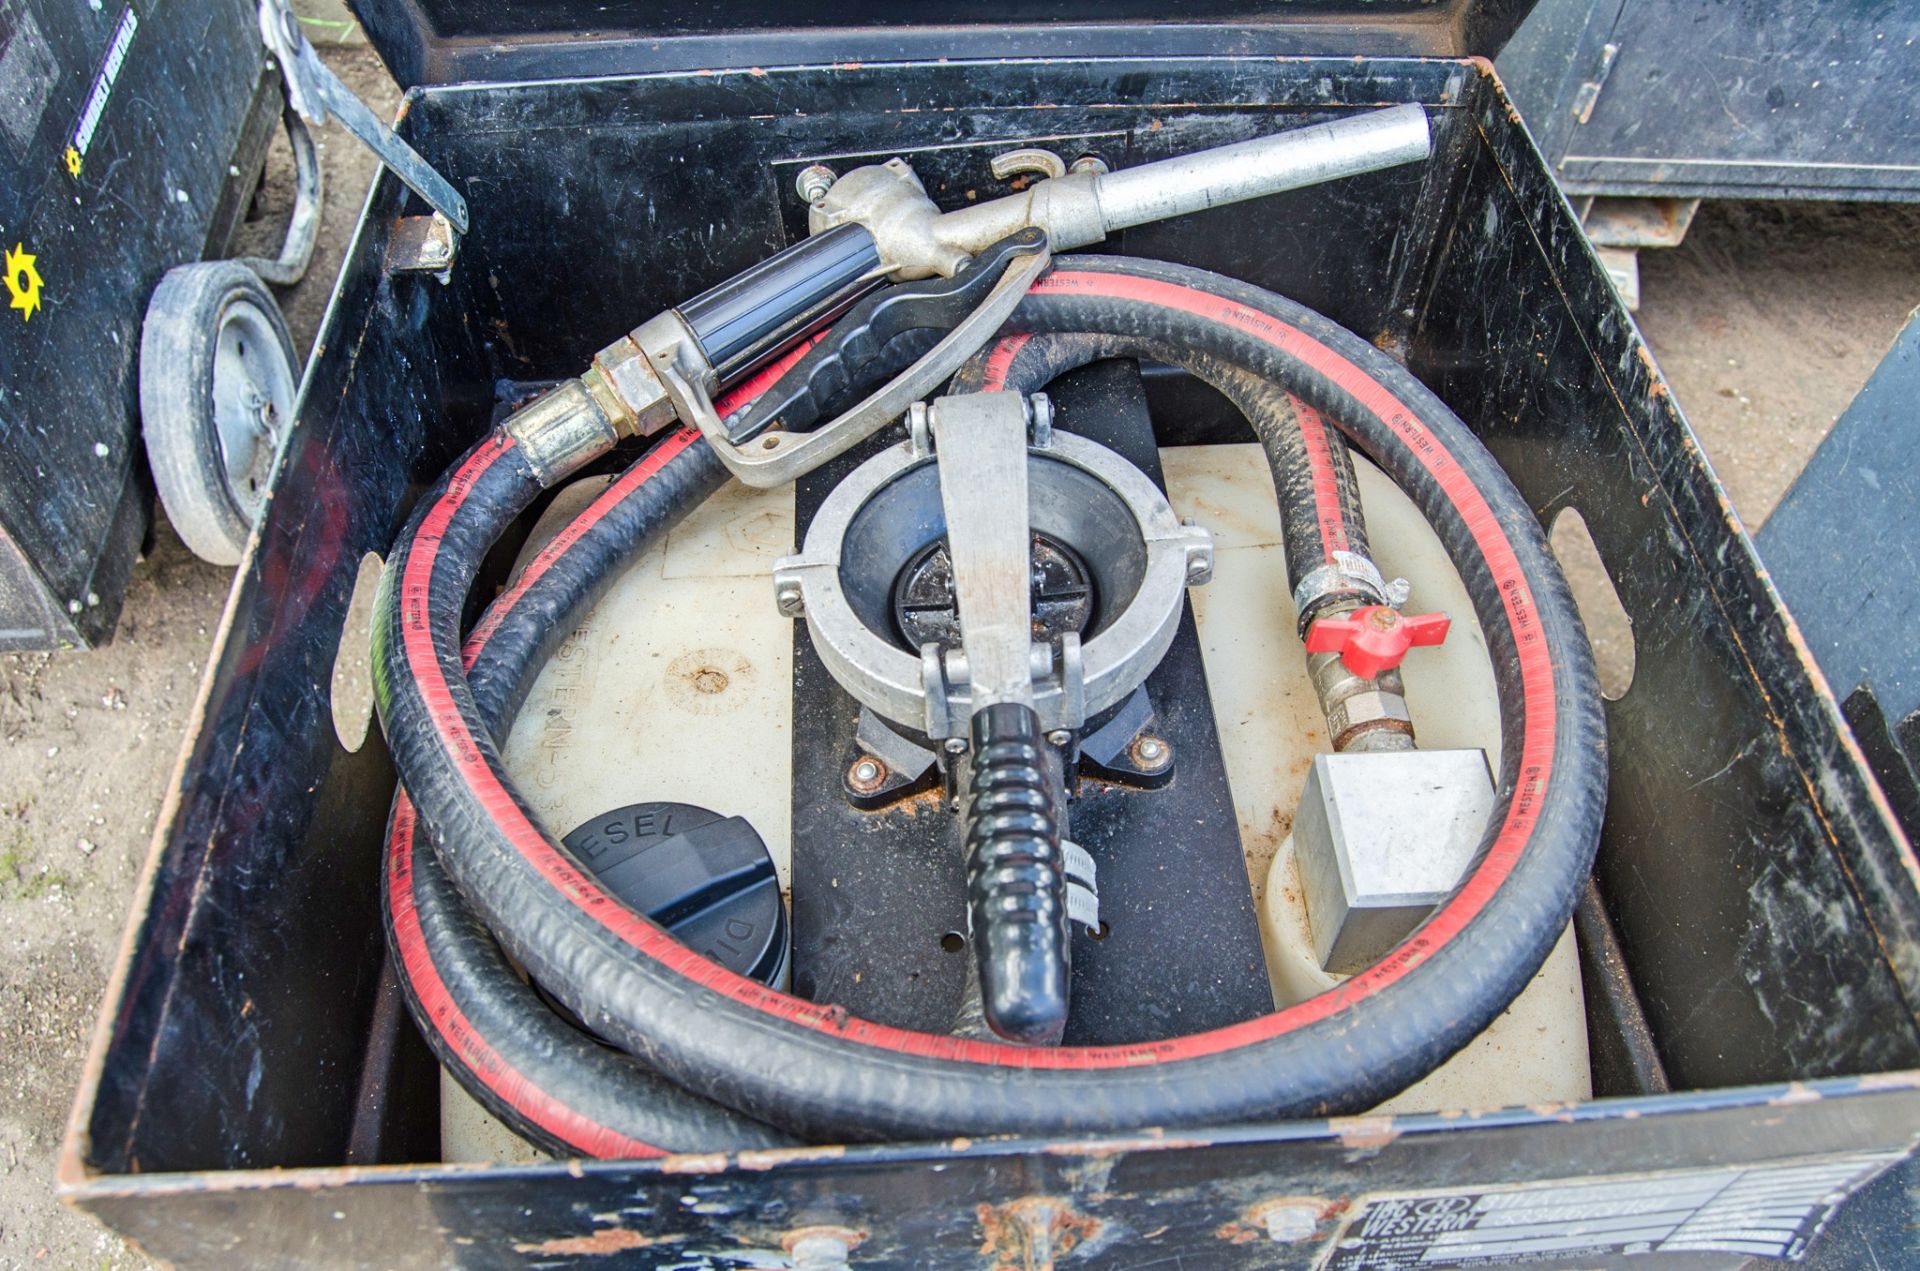 Western 105 litre wheel around bunded fuel bowser c/w manual pump, delivery hose and nozzle A734644 - Image 3 of 3